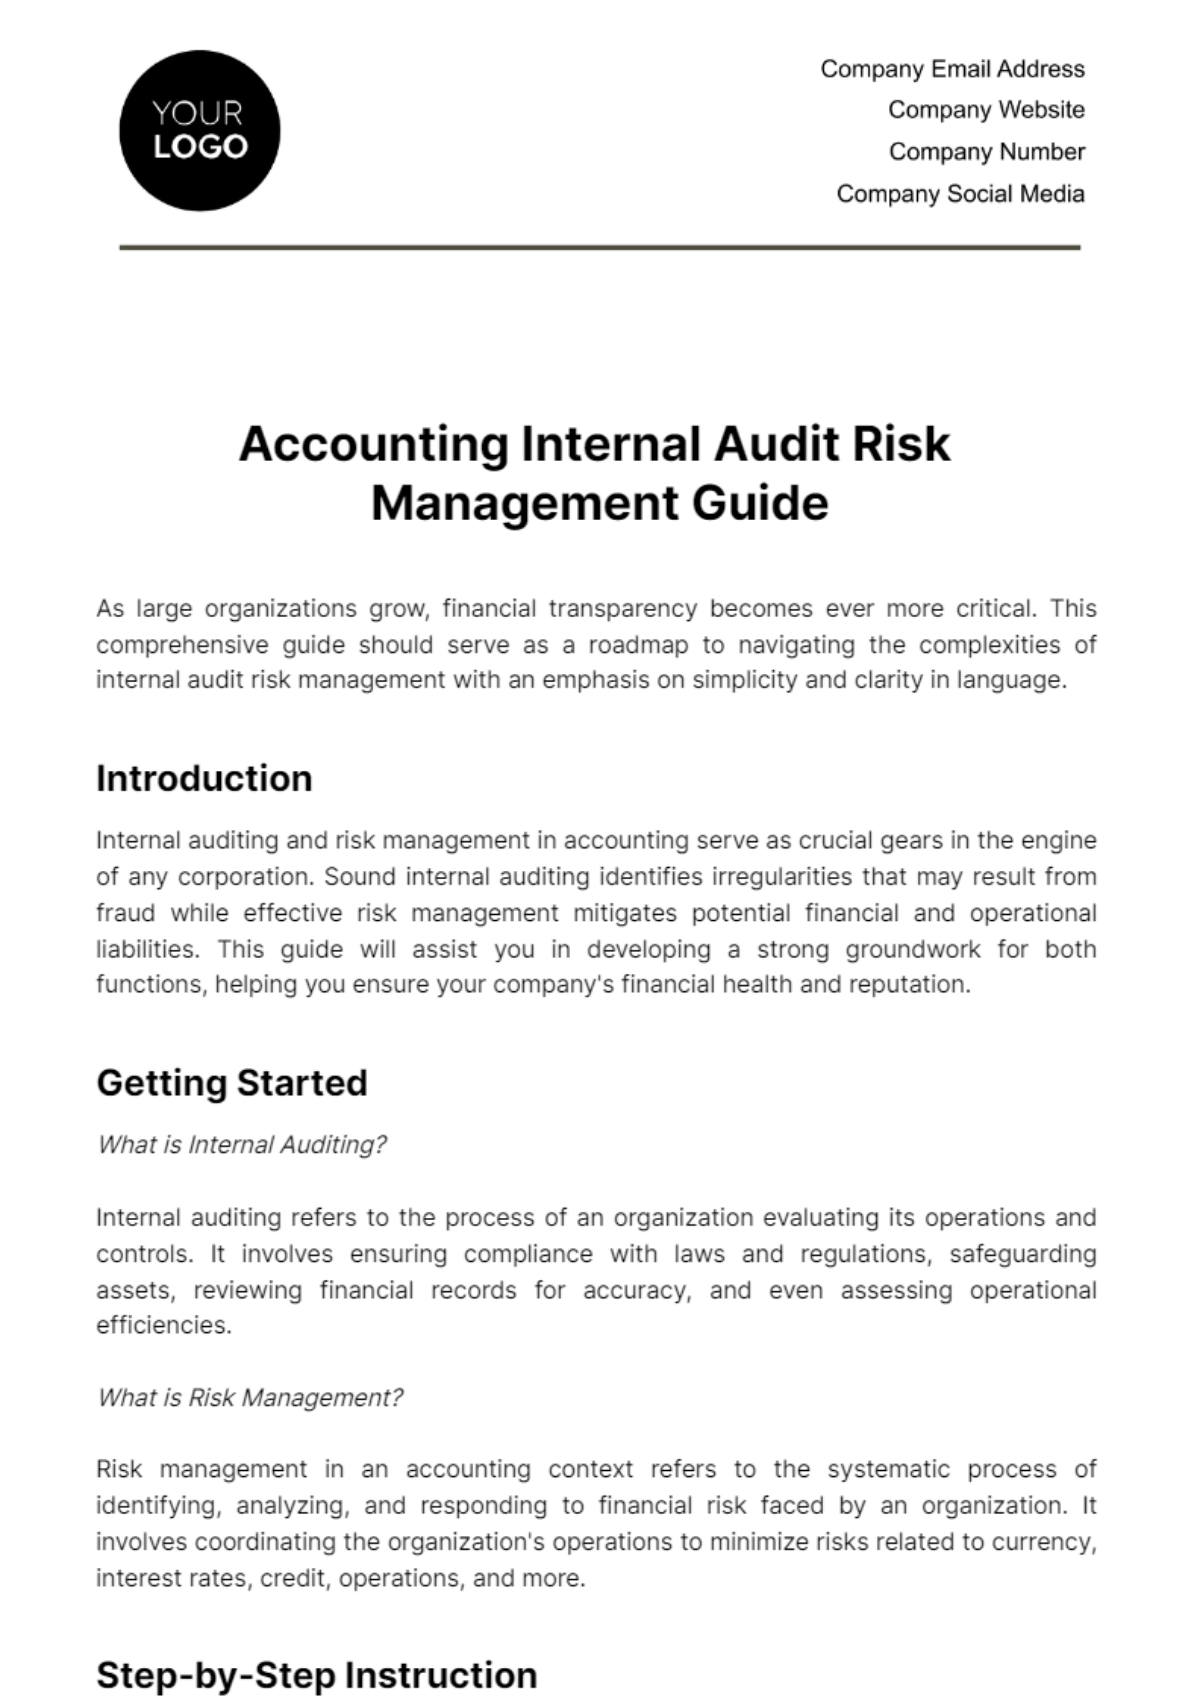 Free Accounting Internal Audit Risk Management Guide Template